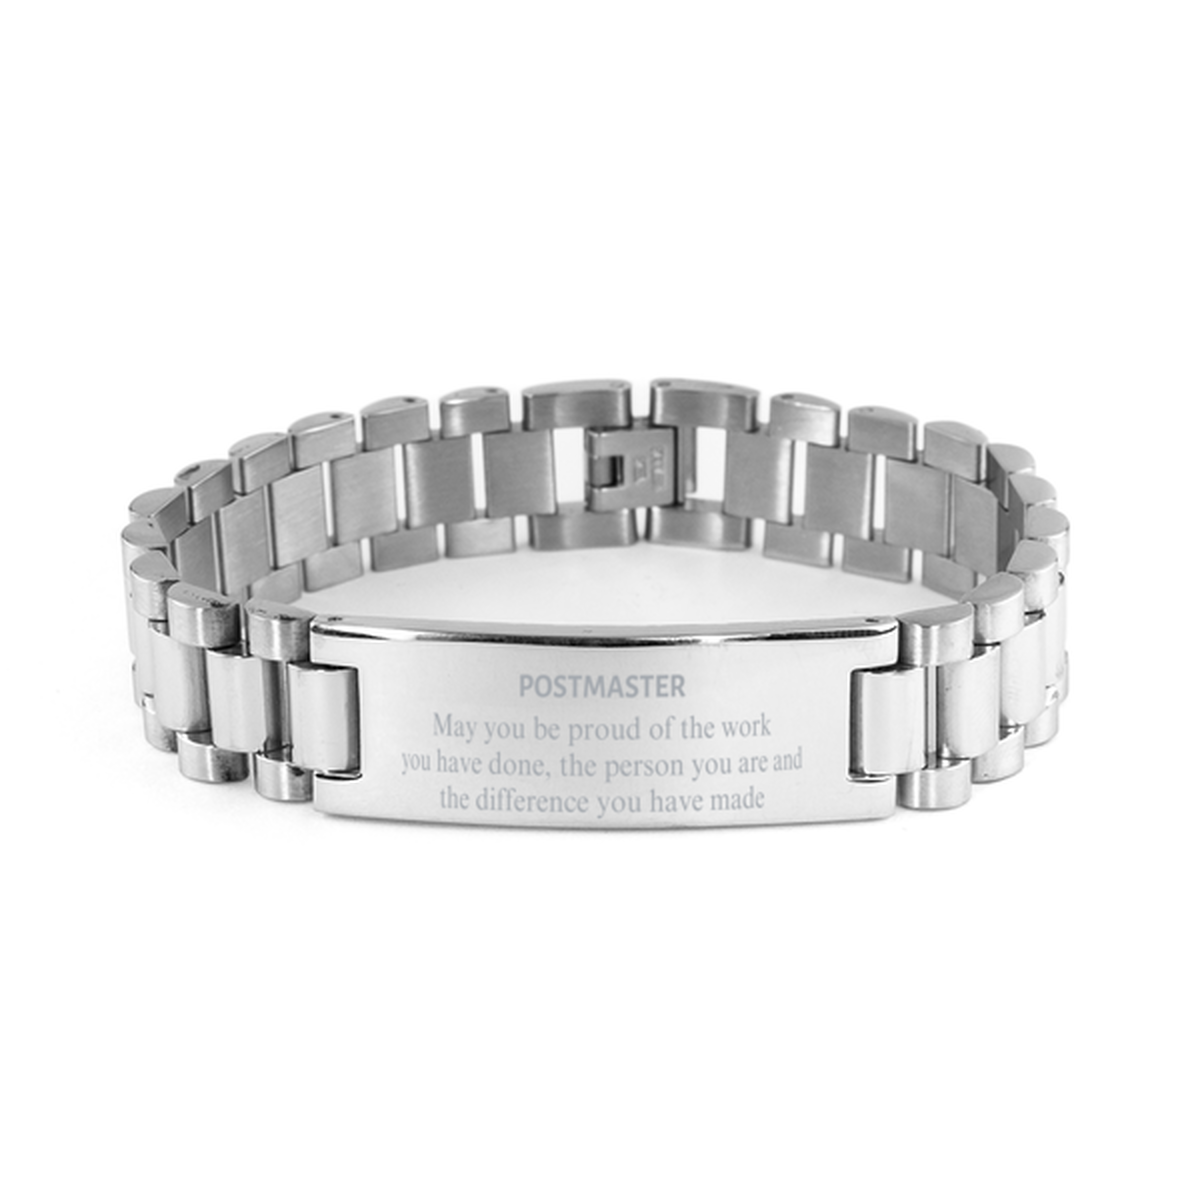 Postmaster May you be proud of the work you have done, Retirement Postmaster Ladder Stainless Steel Bracelet for Colleague Appreciation Gifts Amazing for Postmaster